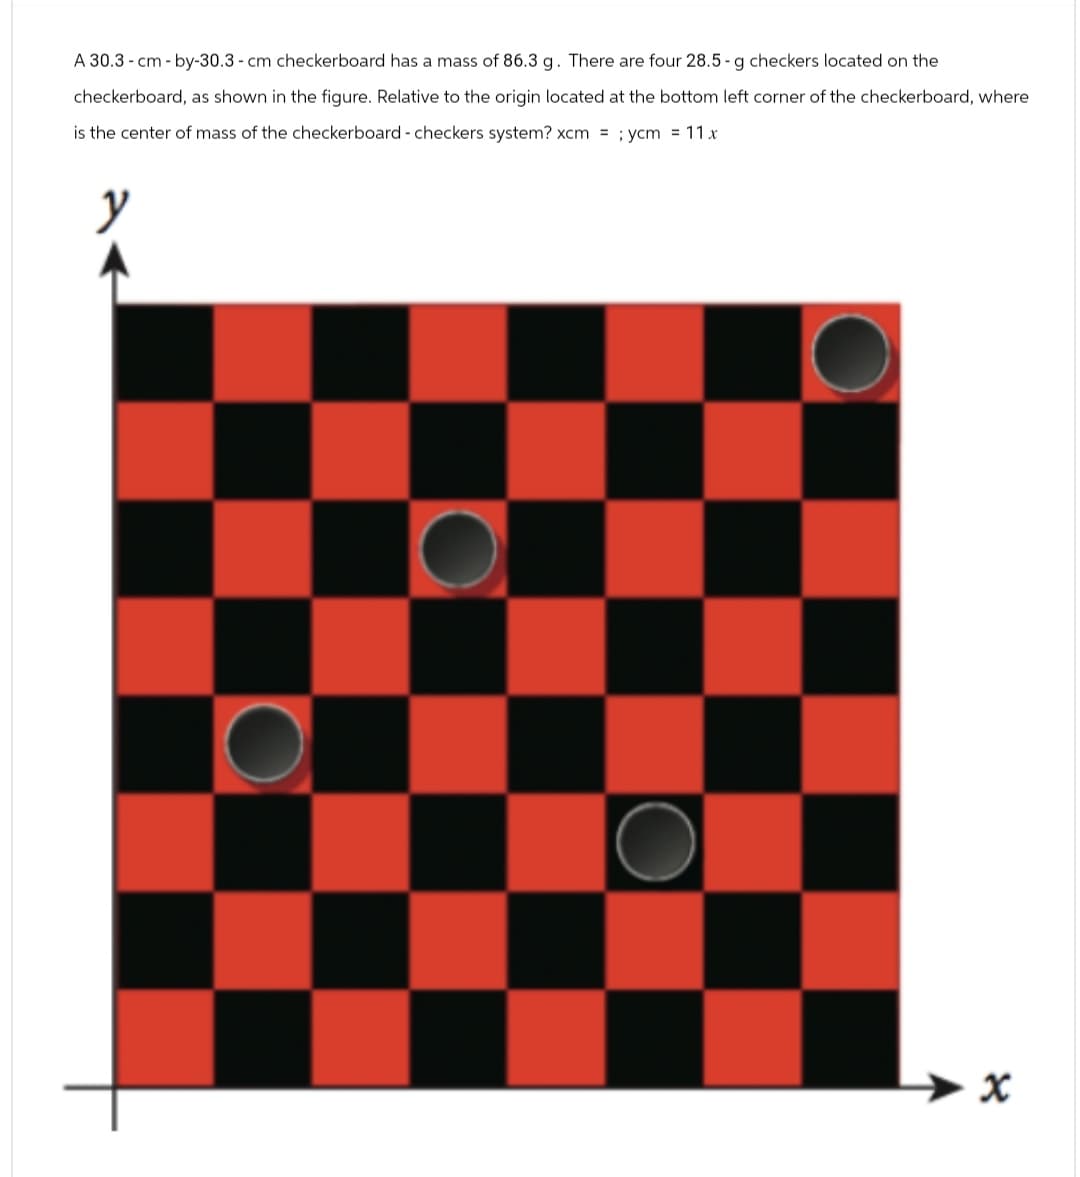 A 30.3 cm-by-30.3 cm checkerboard has a mass of 86.3 g. There are four 28.5-g checkers located on the
checkerboard, as shown in the figure. Relative to the origin located at the bottom left corner of the checkerboard, where
is the center of mass of the checkerboard - checkers system? xcm = ;ycm = 11x
y
x